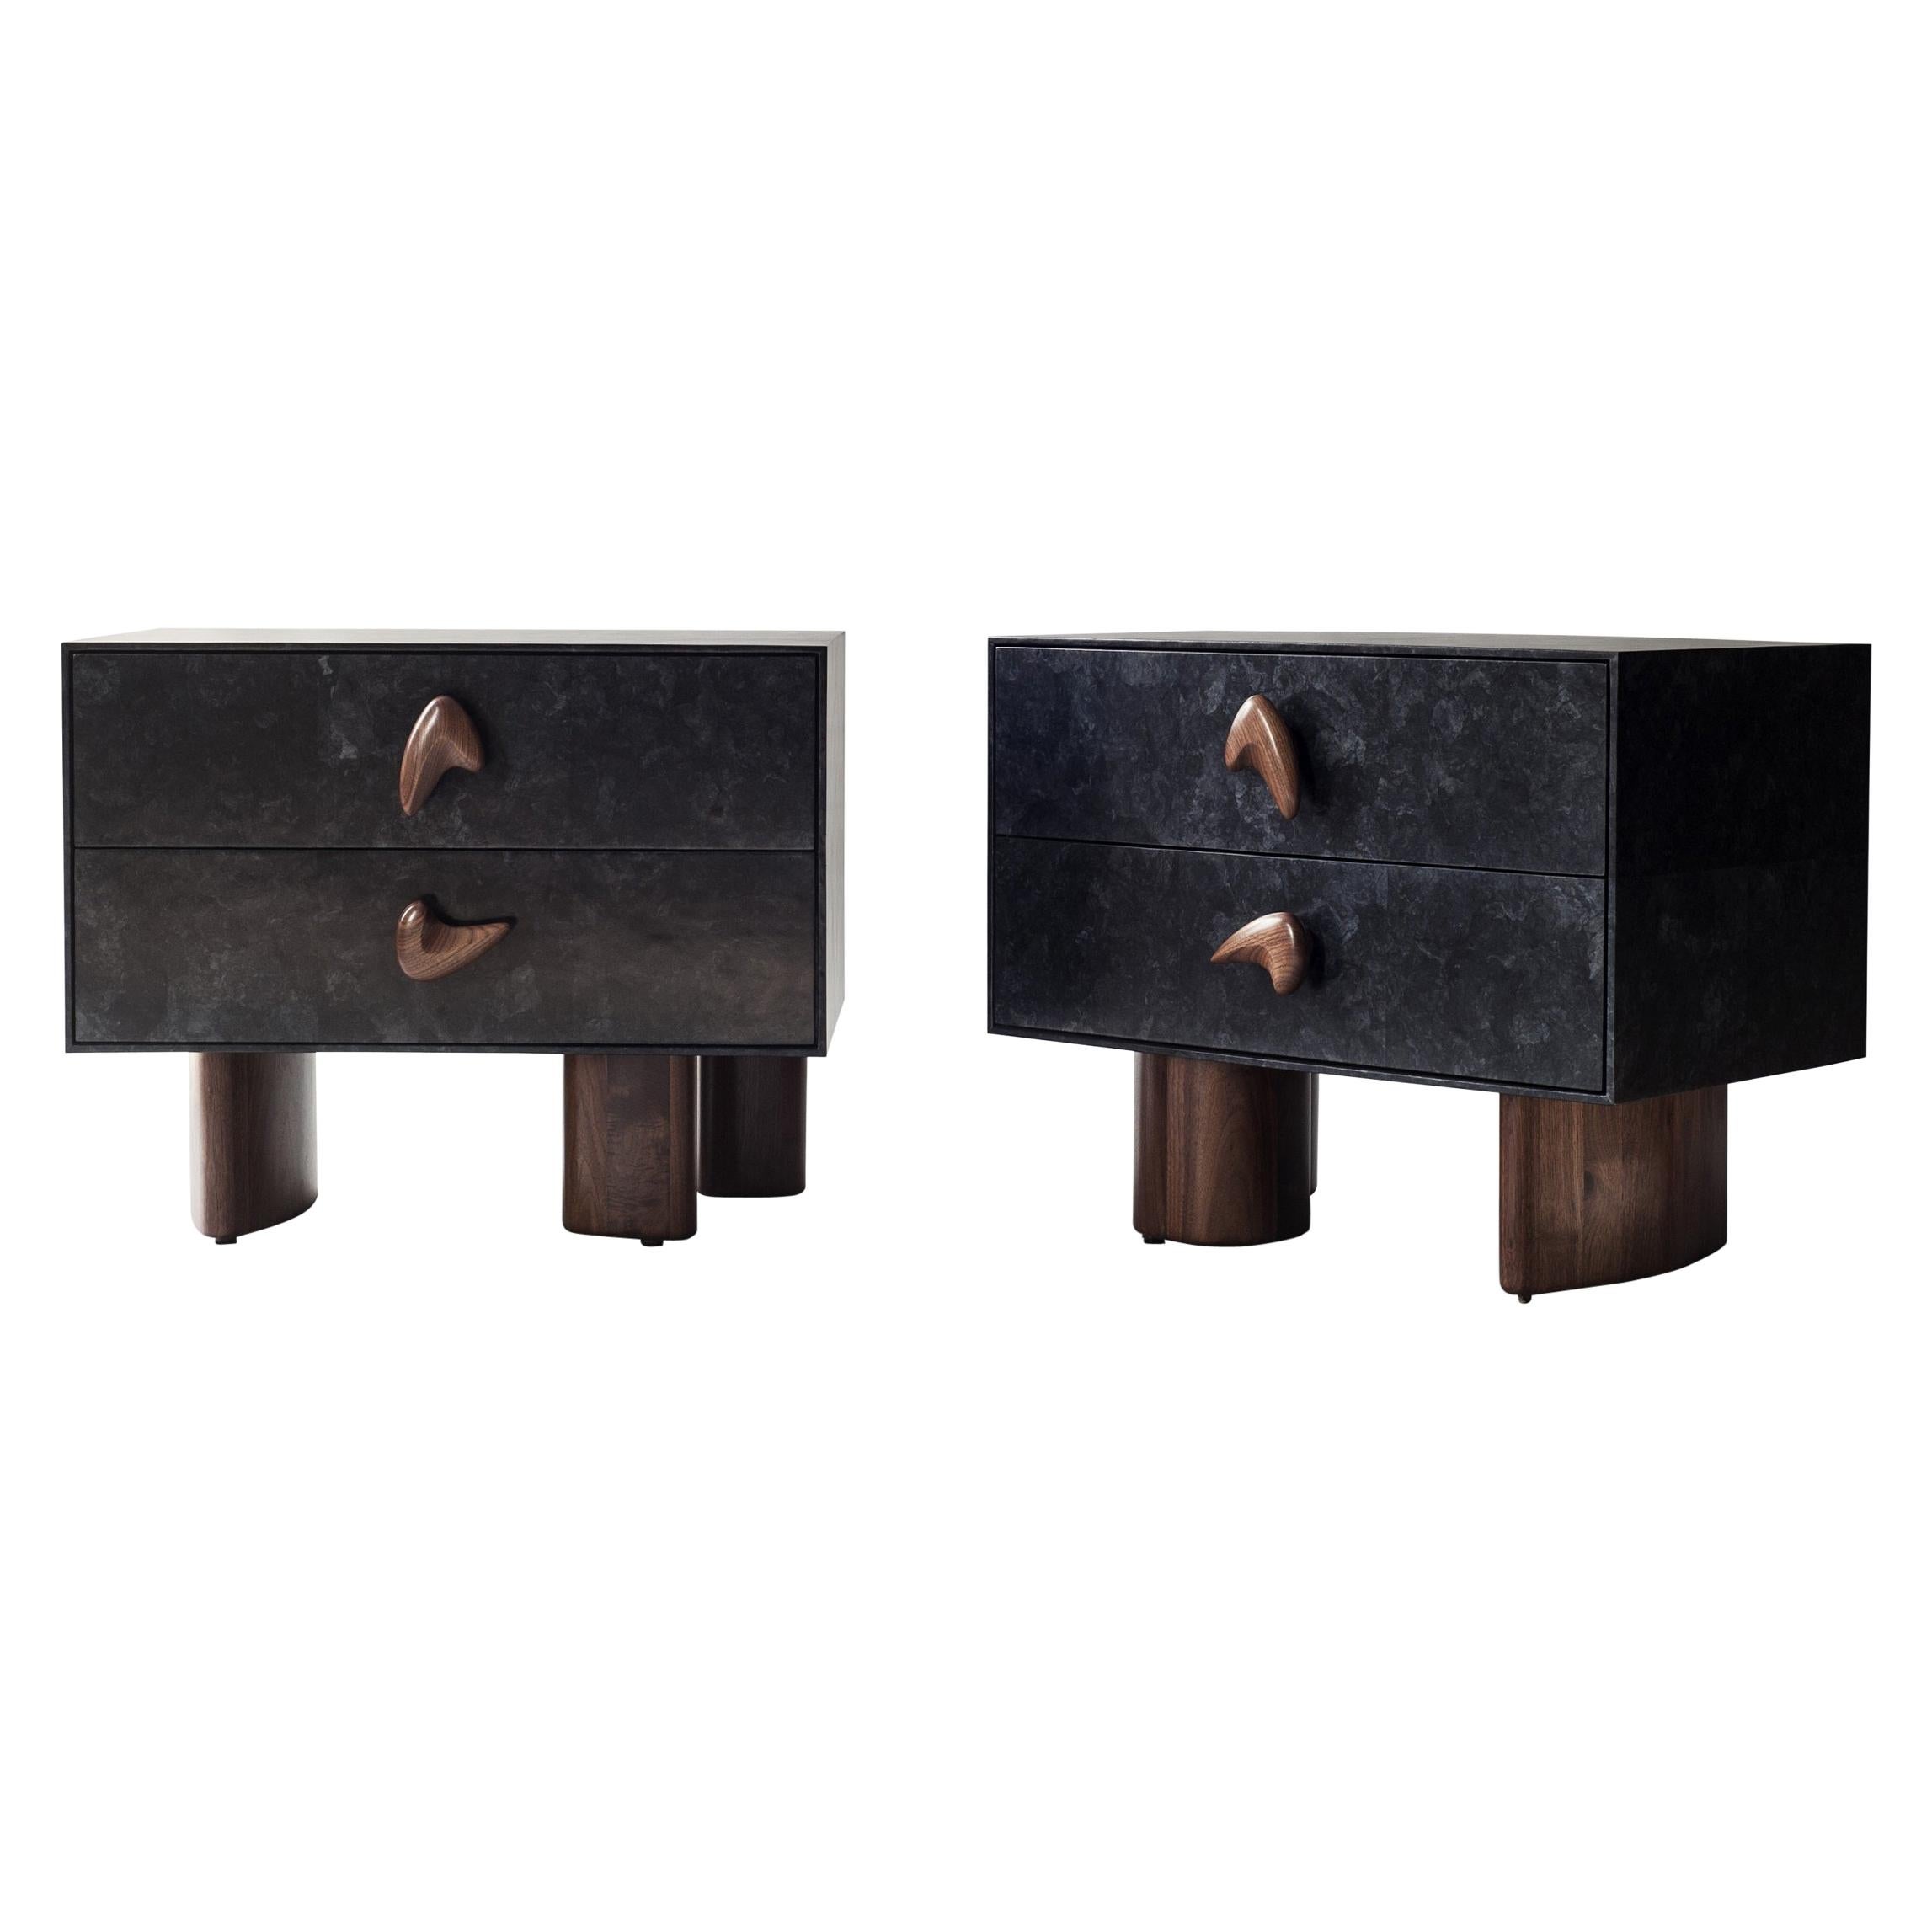 Corbu Bedside Table by DeMuro Das in Charcoal Carta and Solid Walnut